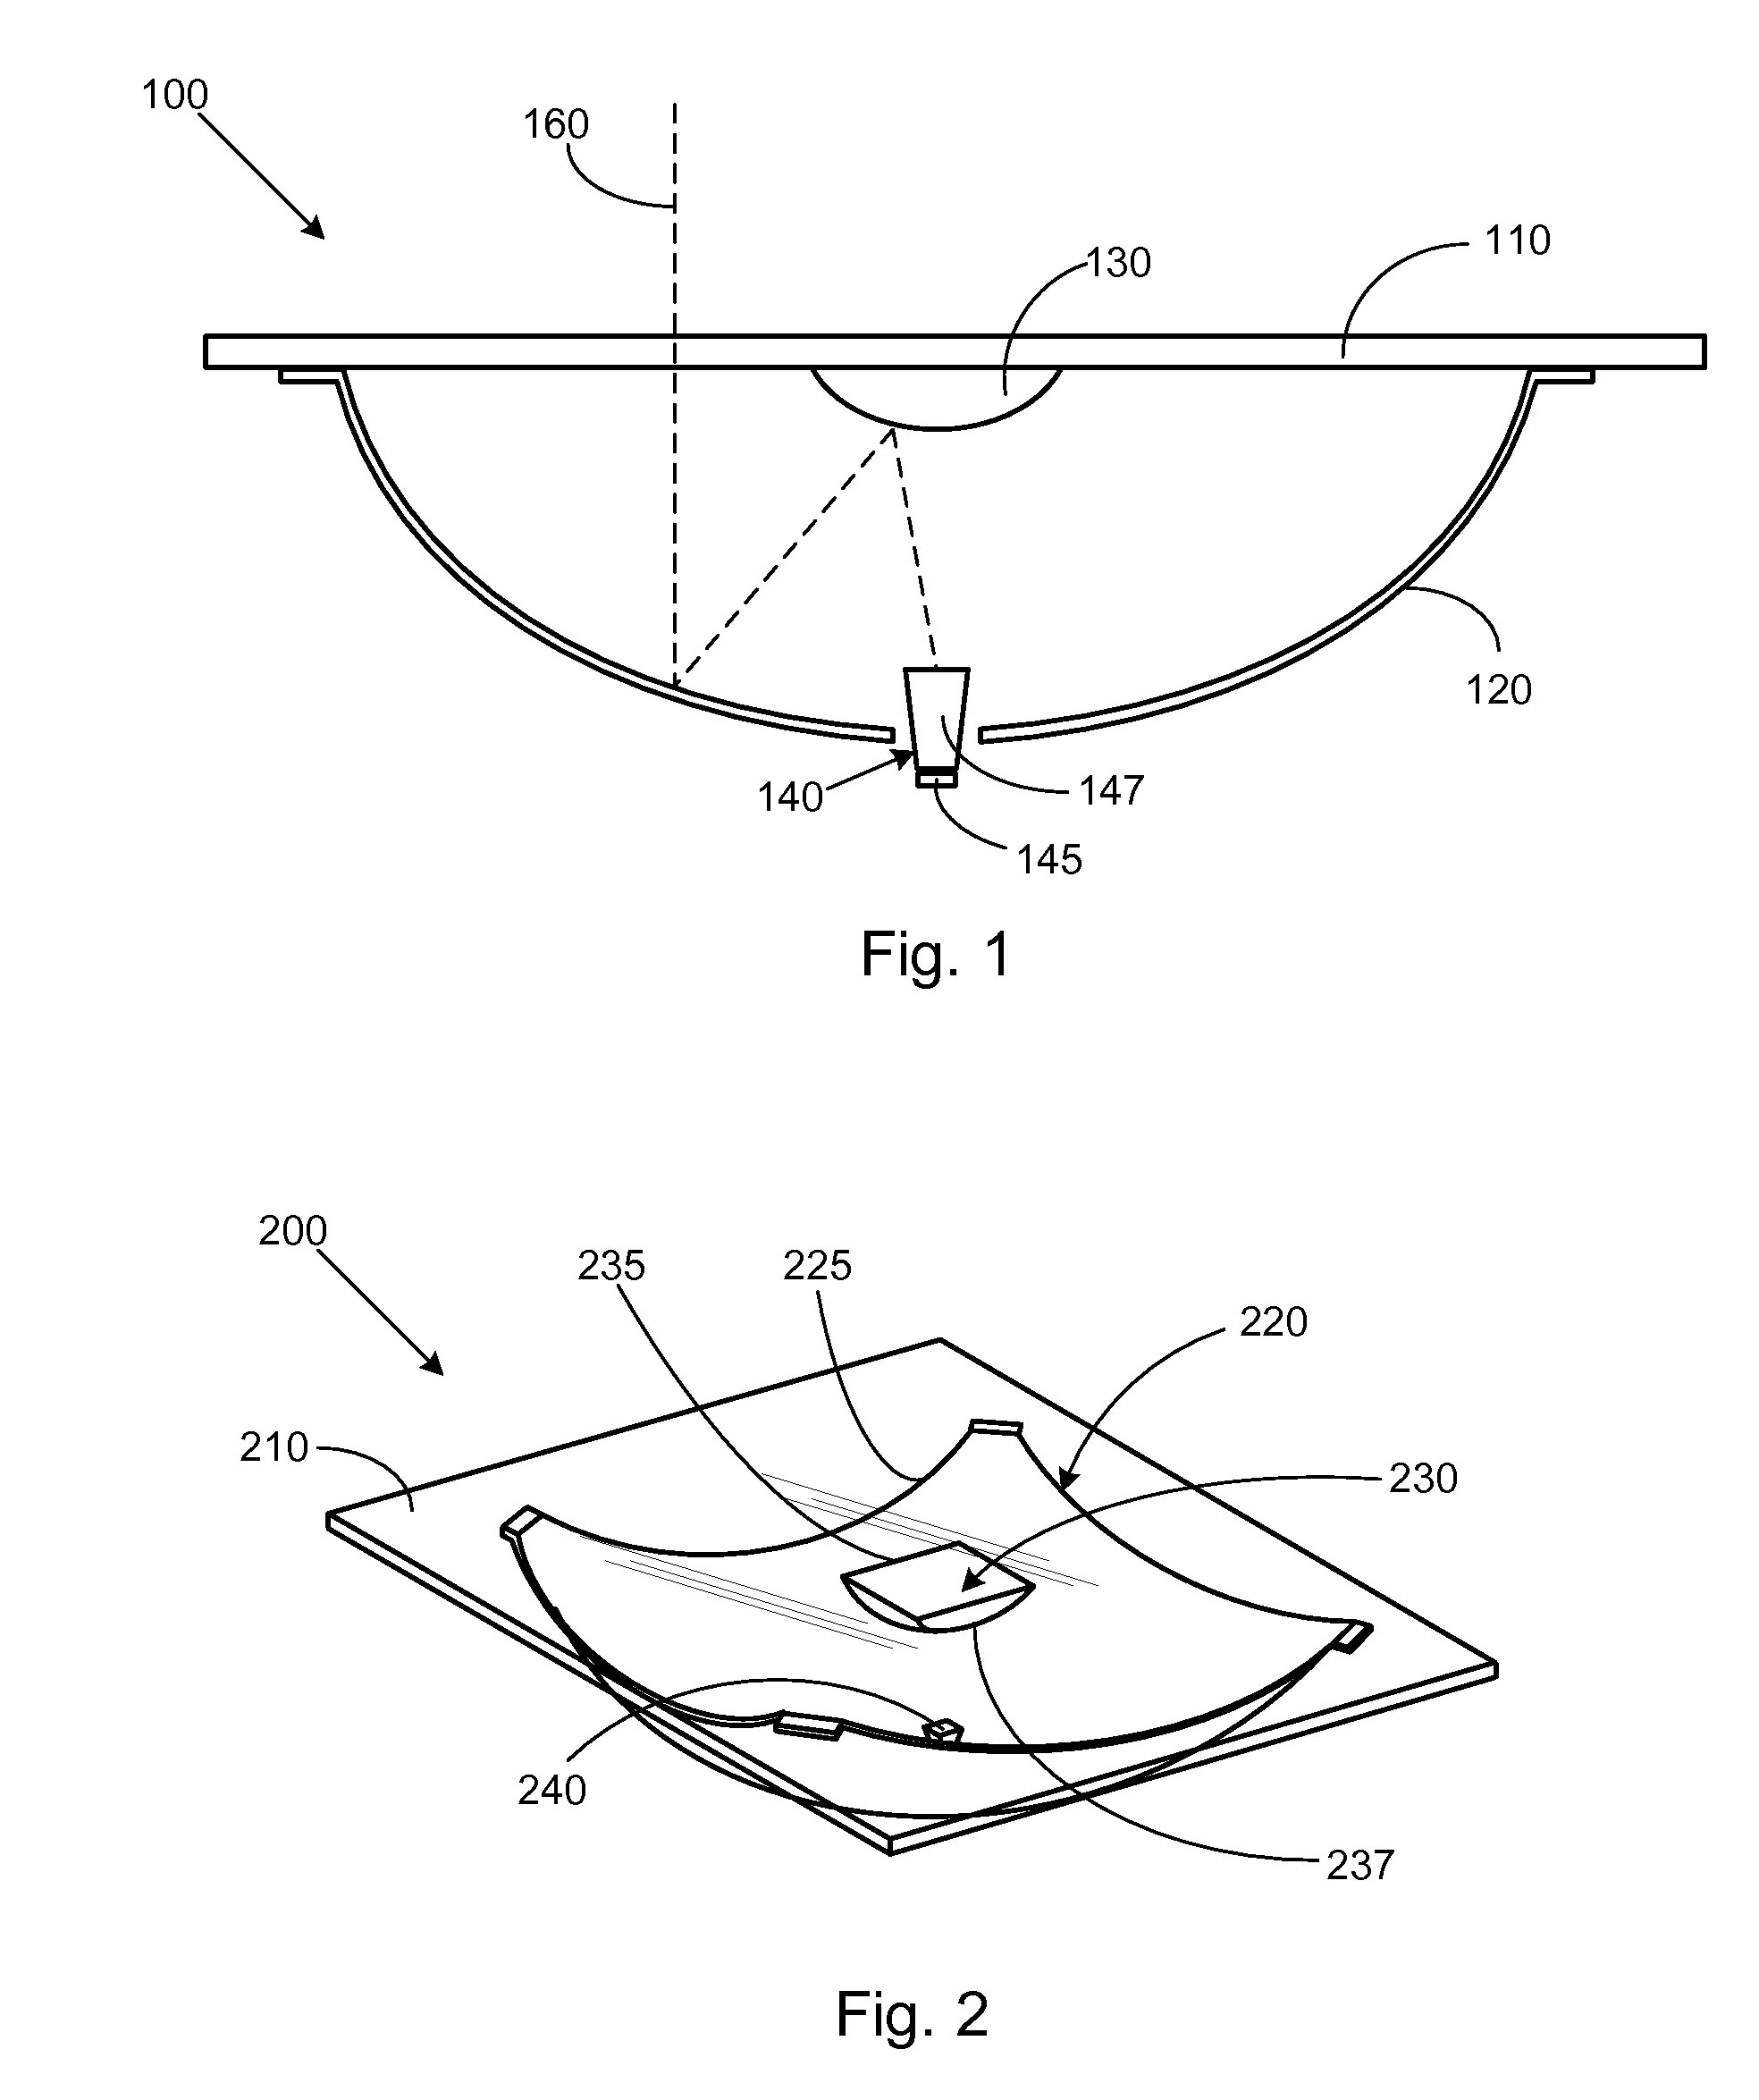 Solar concentrator with square mirrors